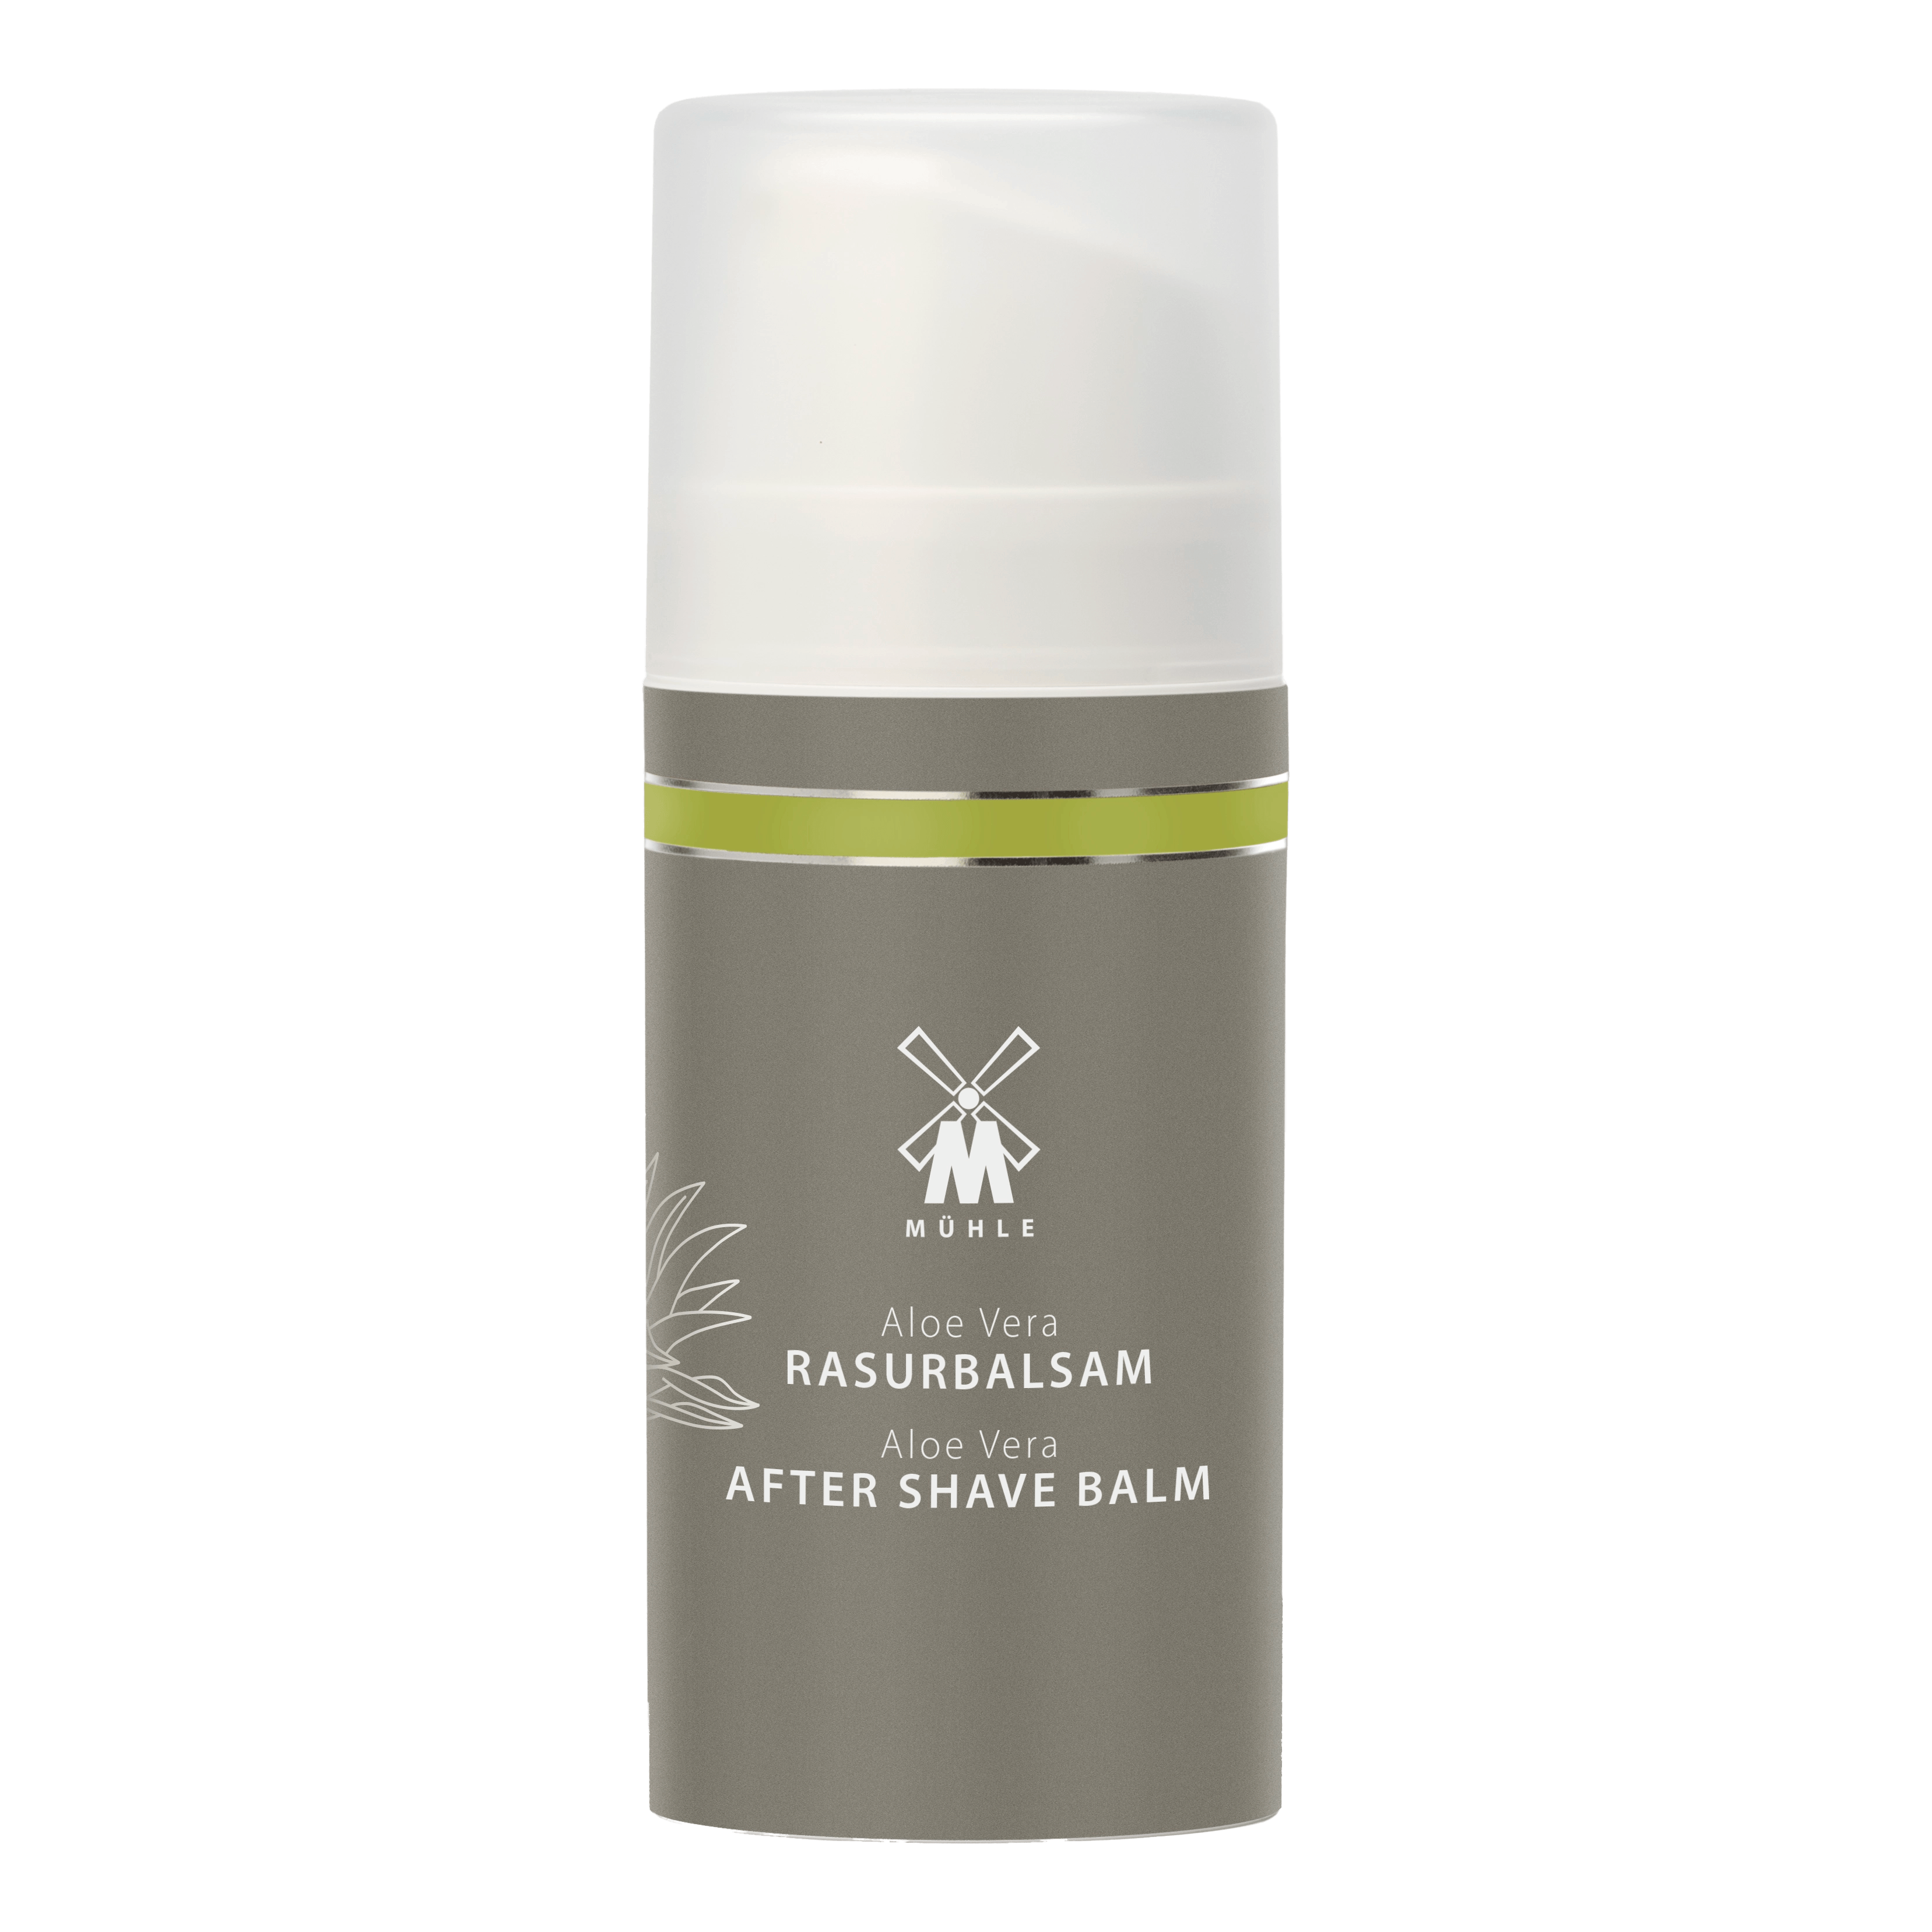 Mühle After Shave Balm - Aloe vera